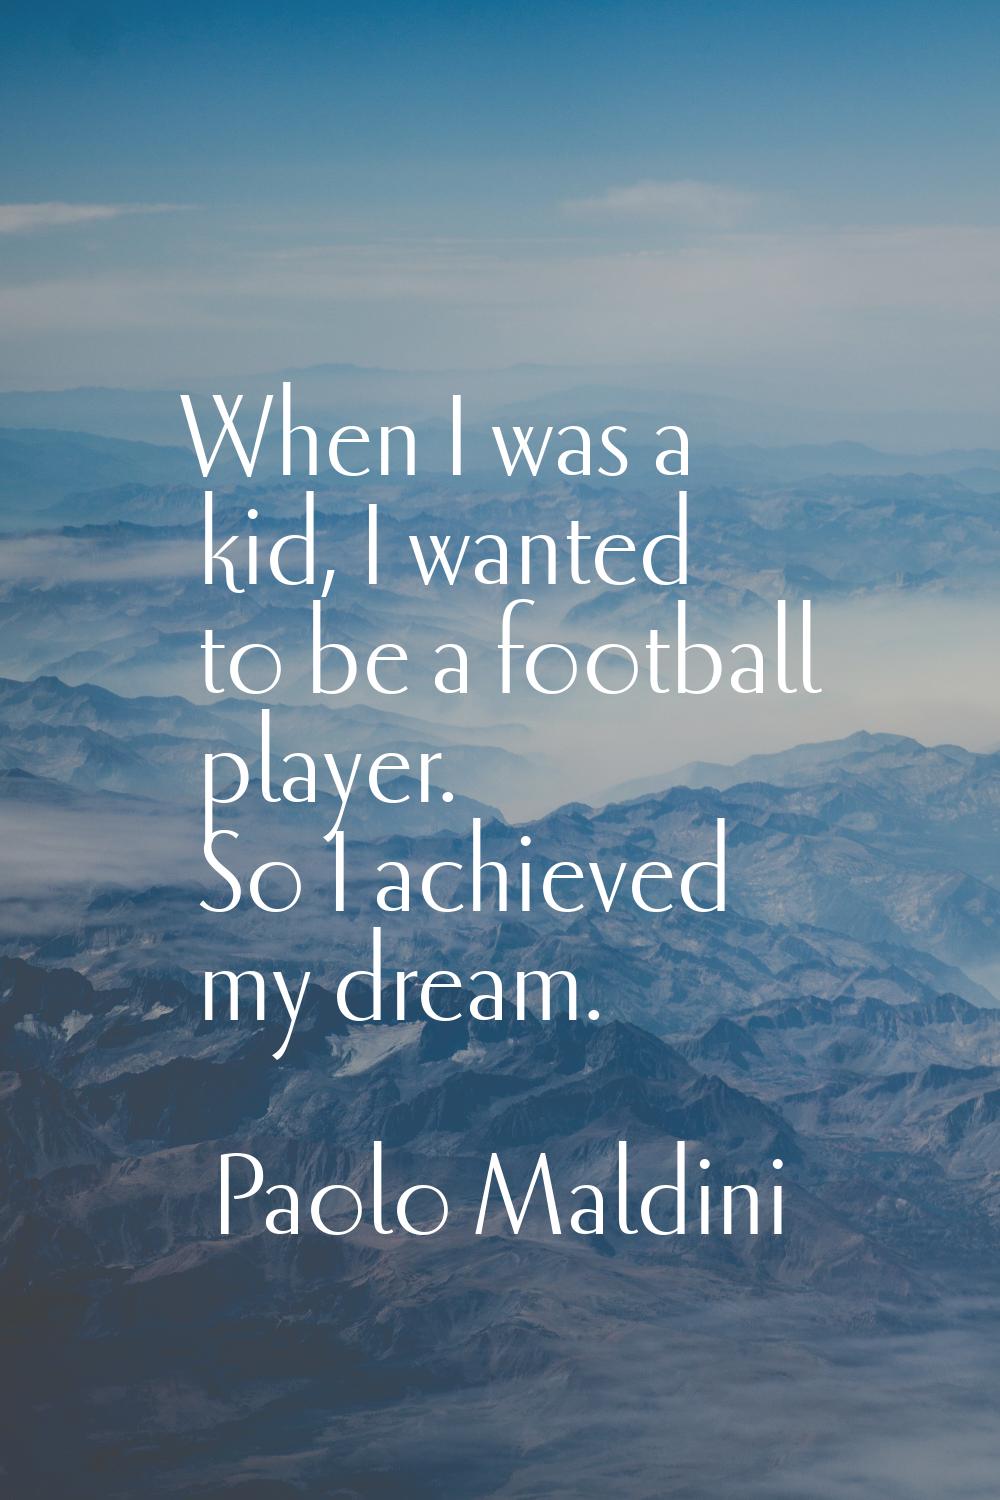 When I was a kid, I wanted to be a football player. So I achieved my dream.